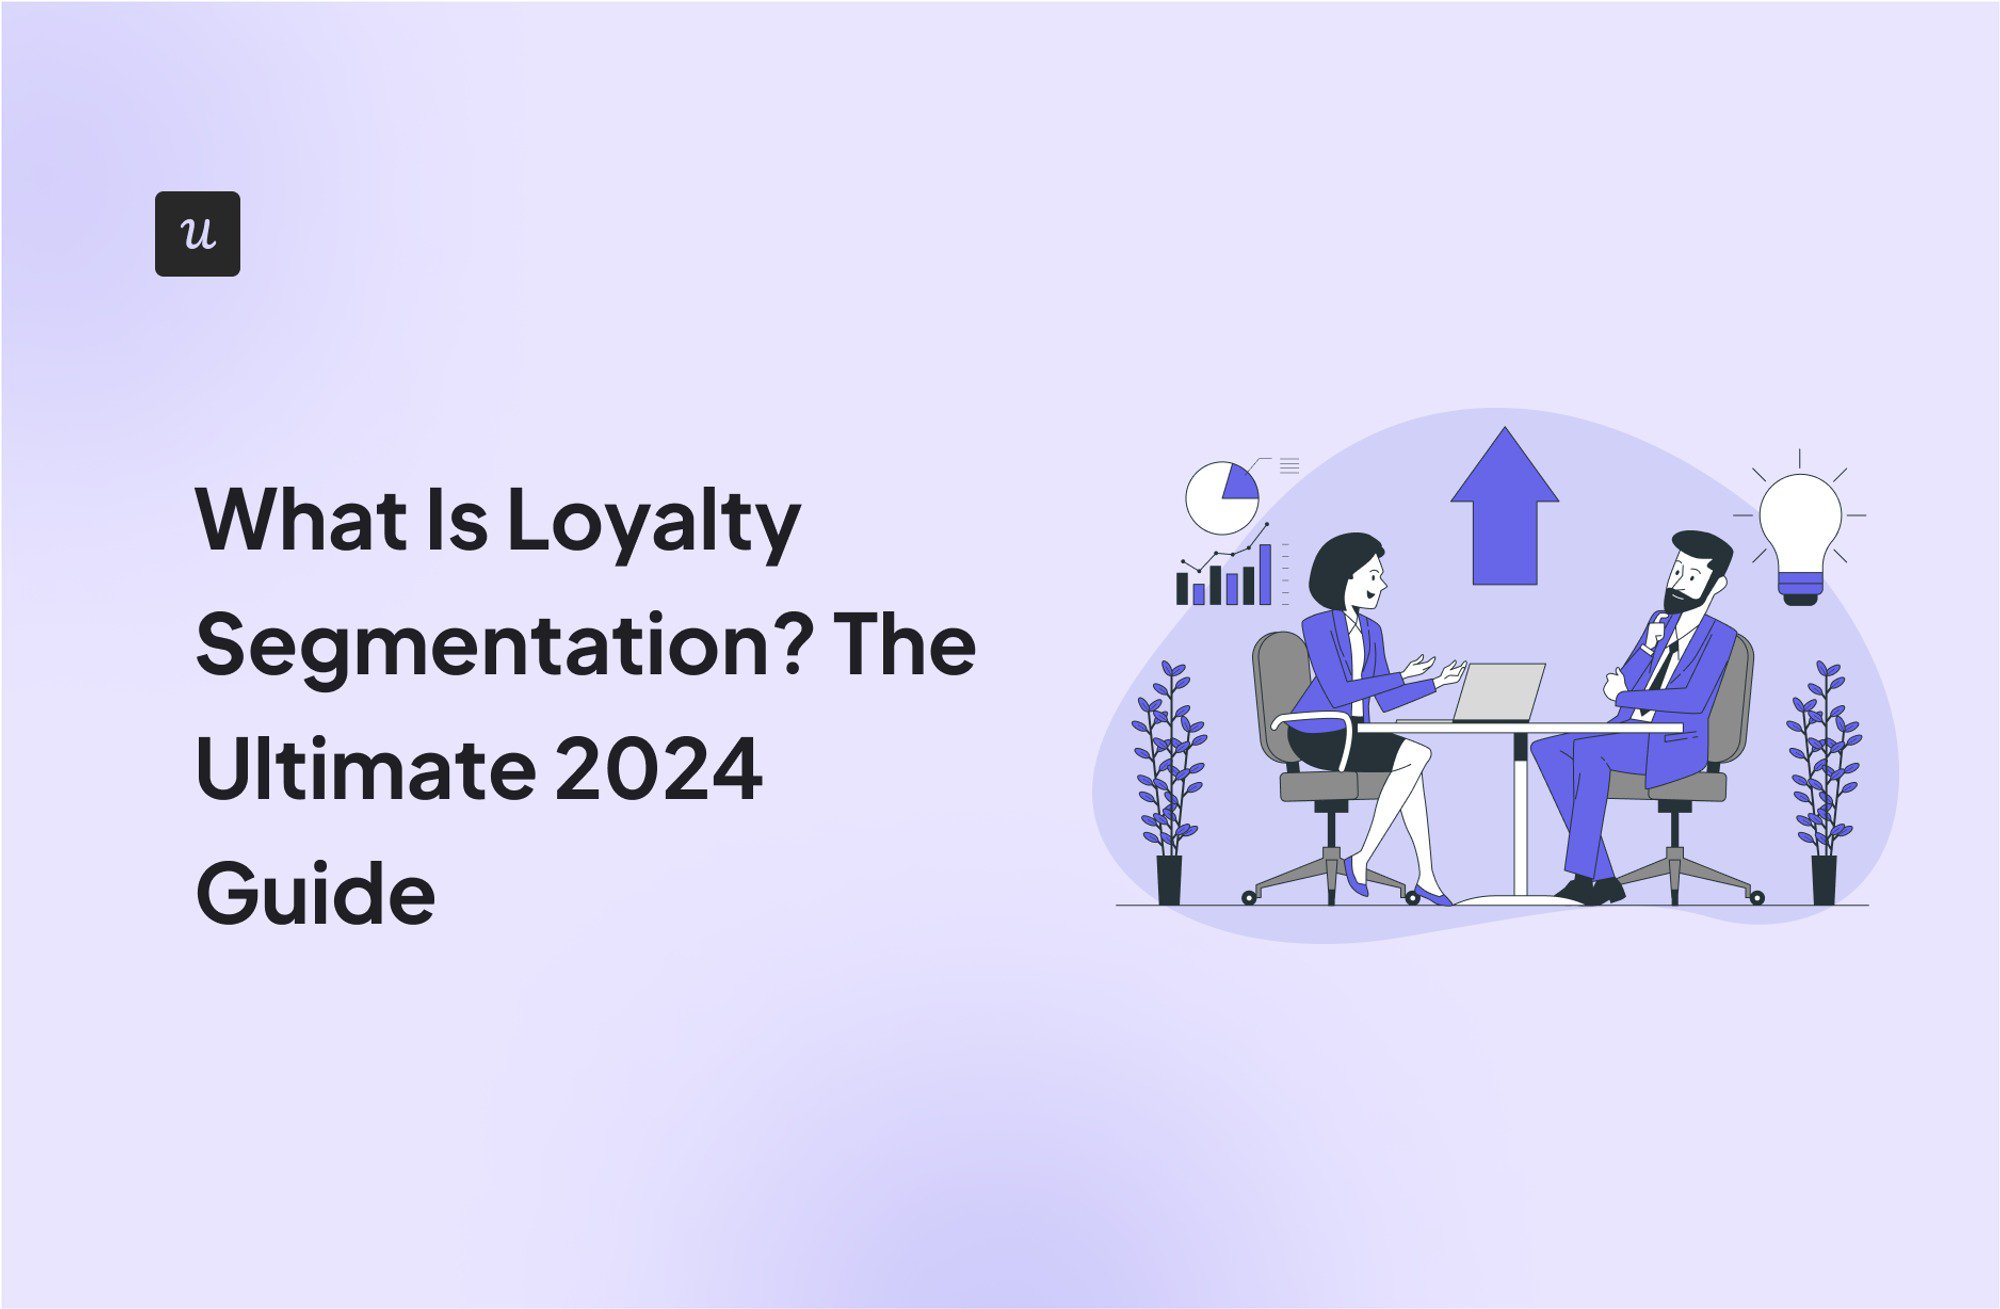 What Is Loyalty Segmentation? The Ultimate 2024 Guide cover